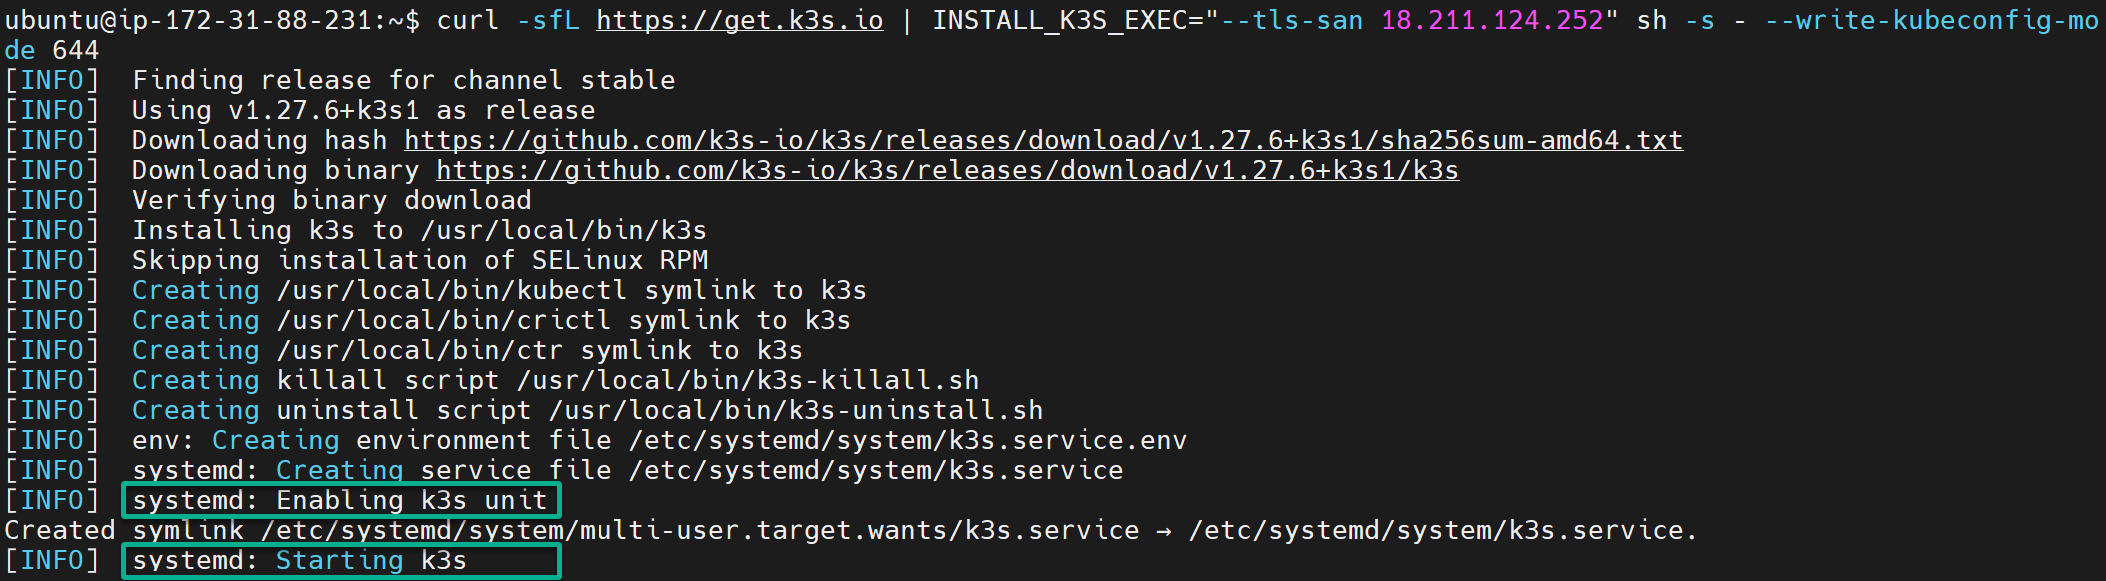 letsencrypt with k3s kubernetes - Installing a k3s cluster